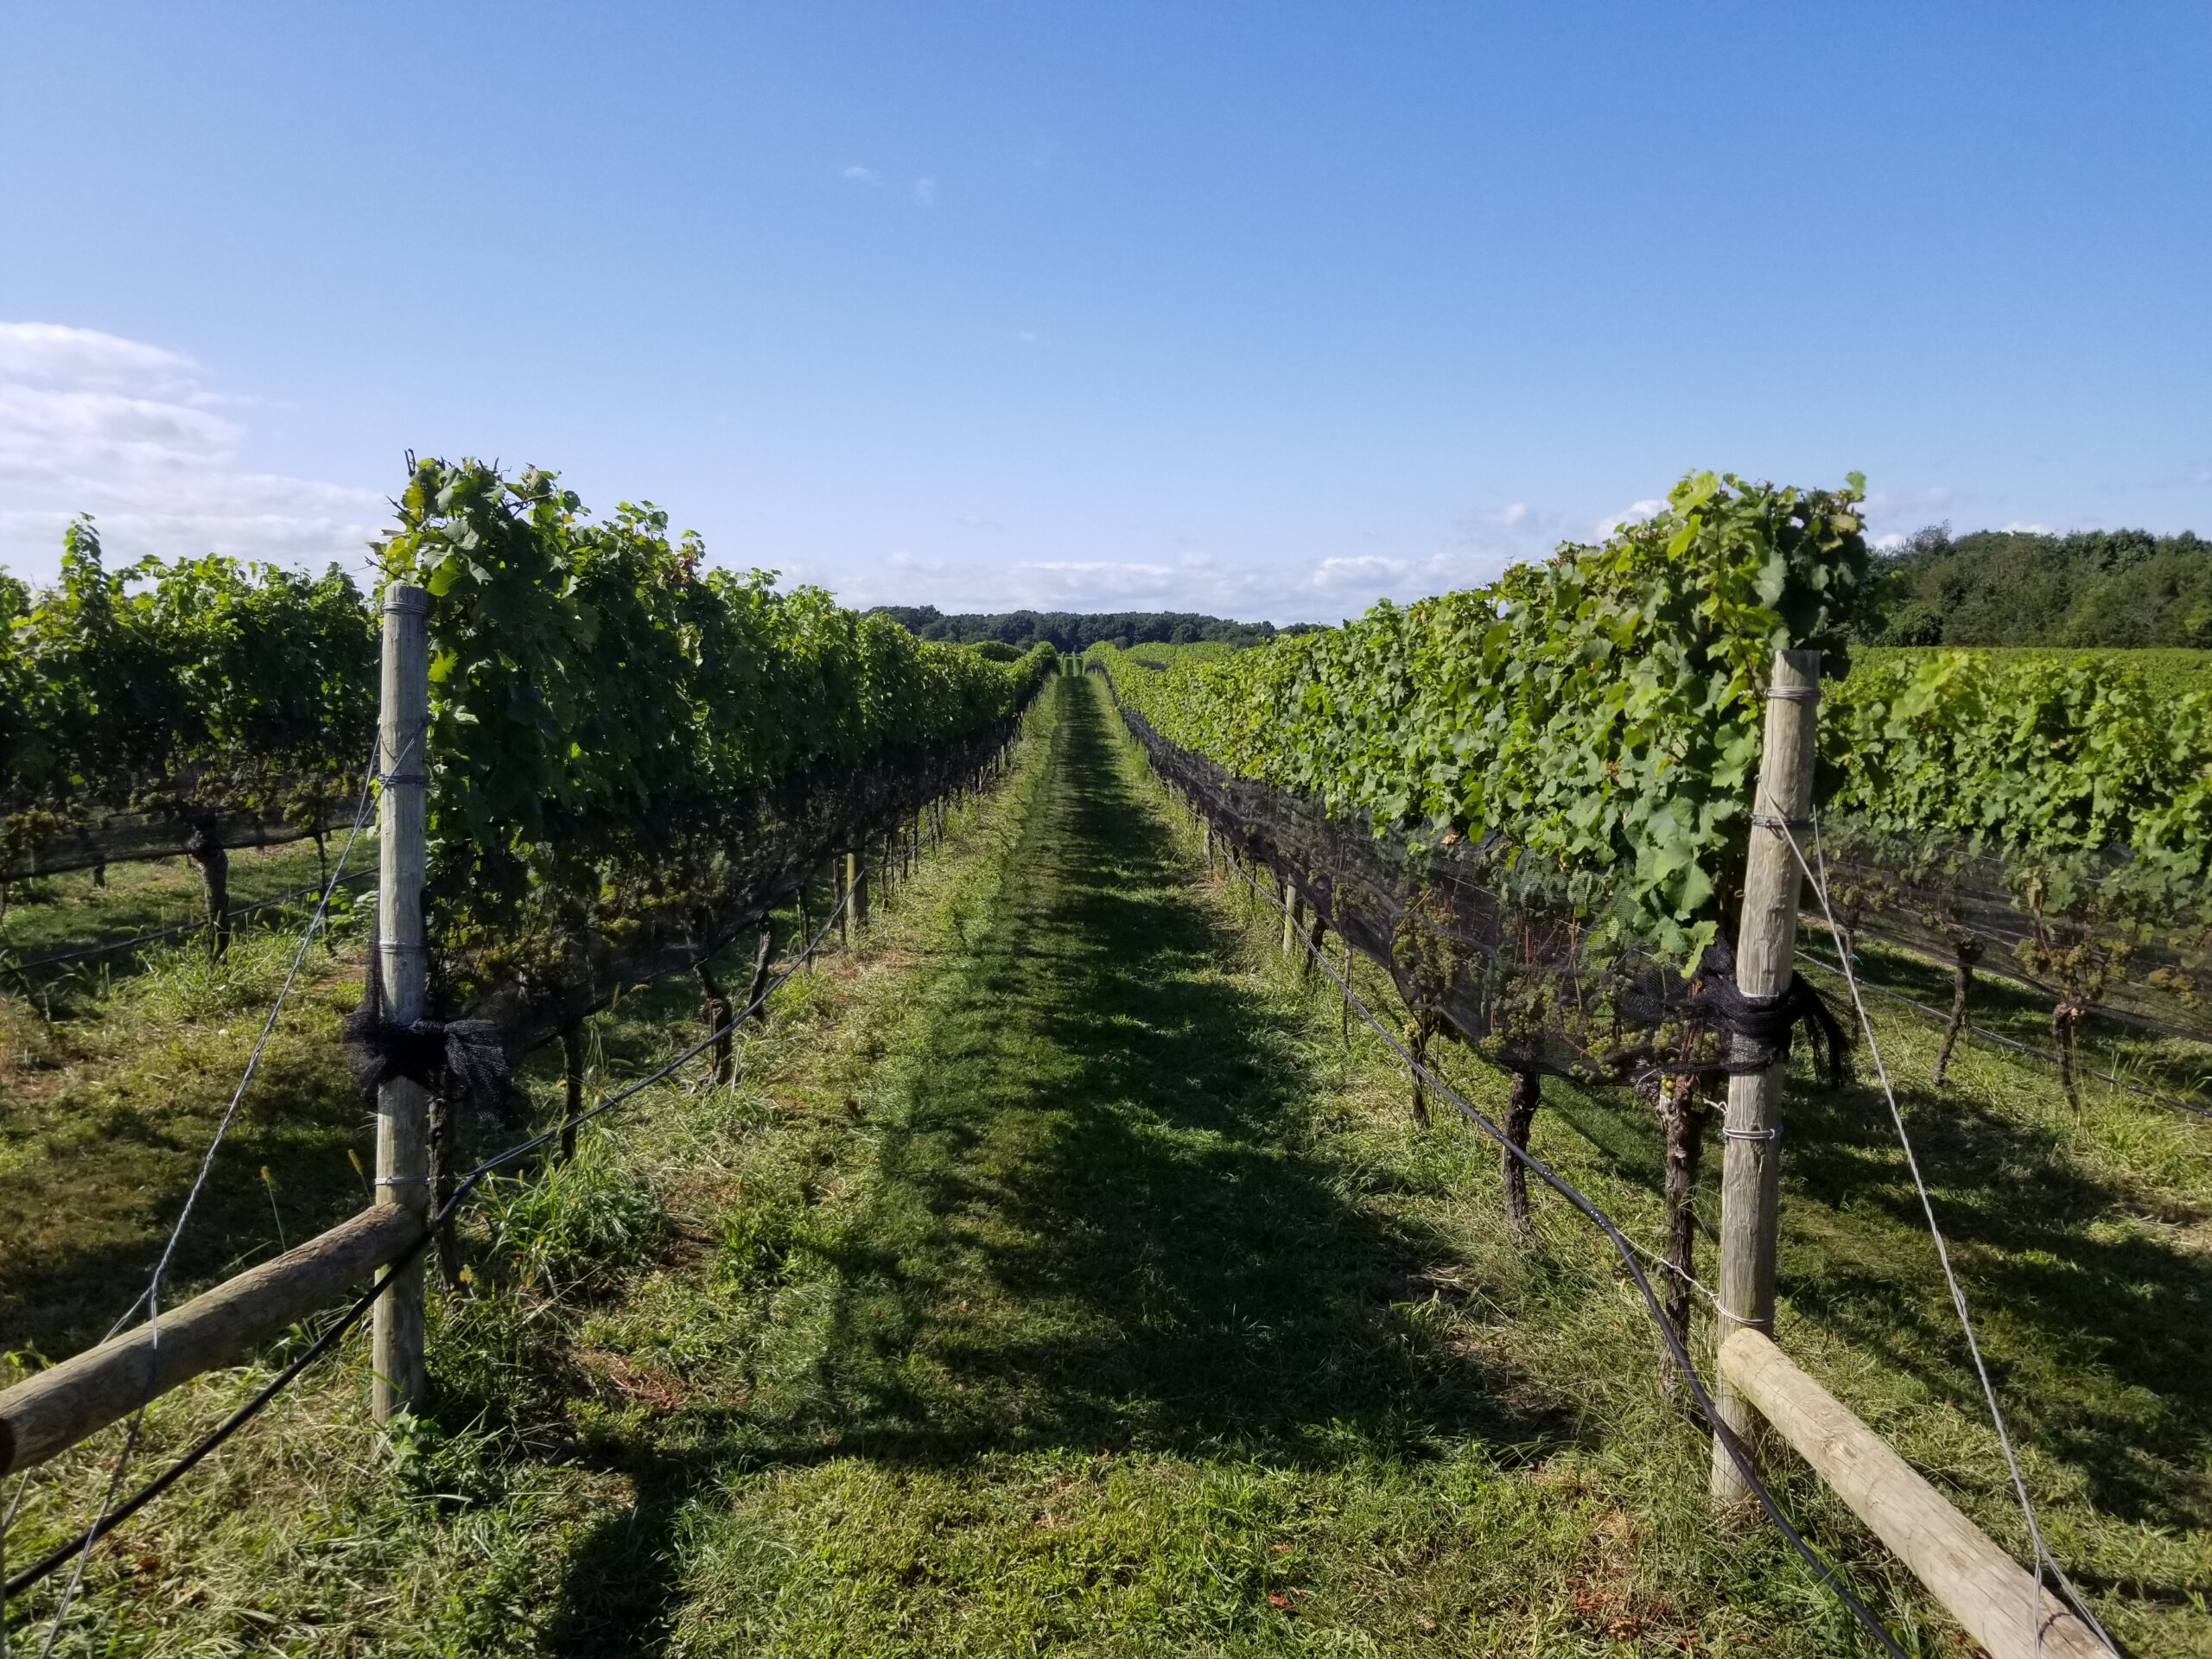 Borghese Vineyard in Cutchogue, home of the North Fork's oldest vines.